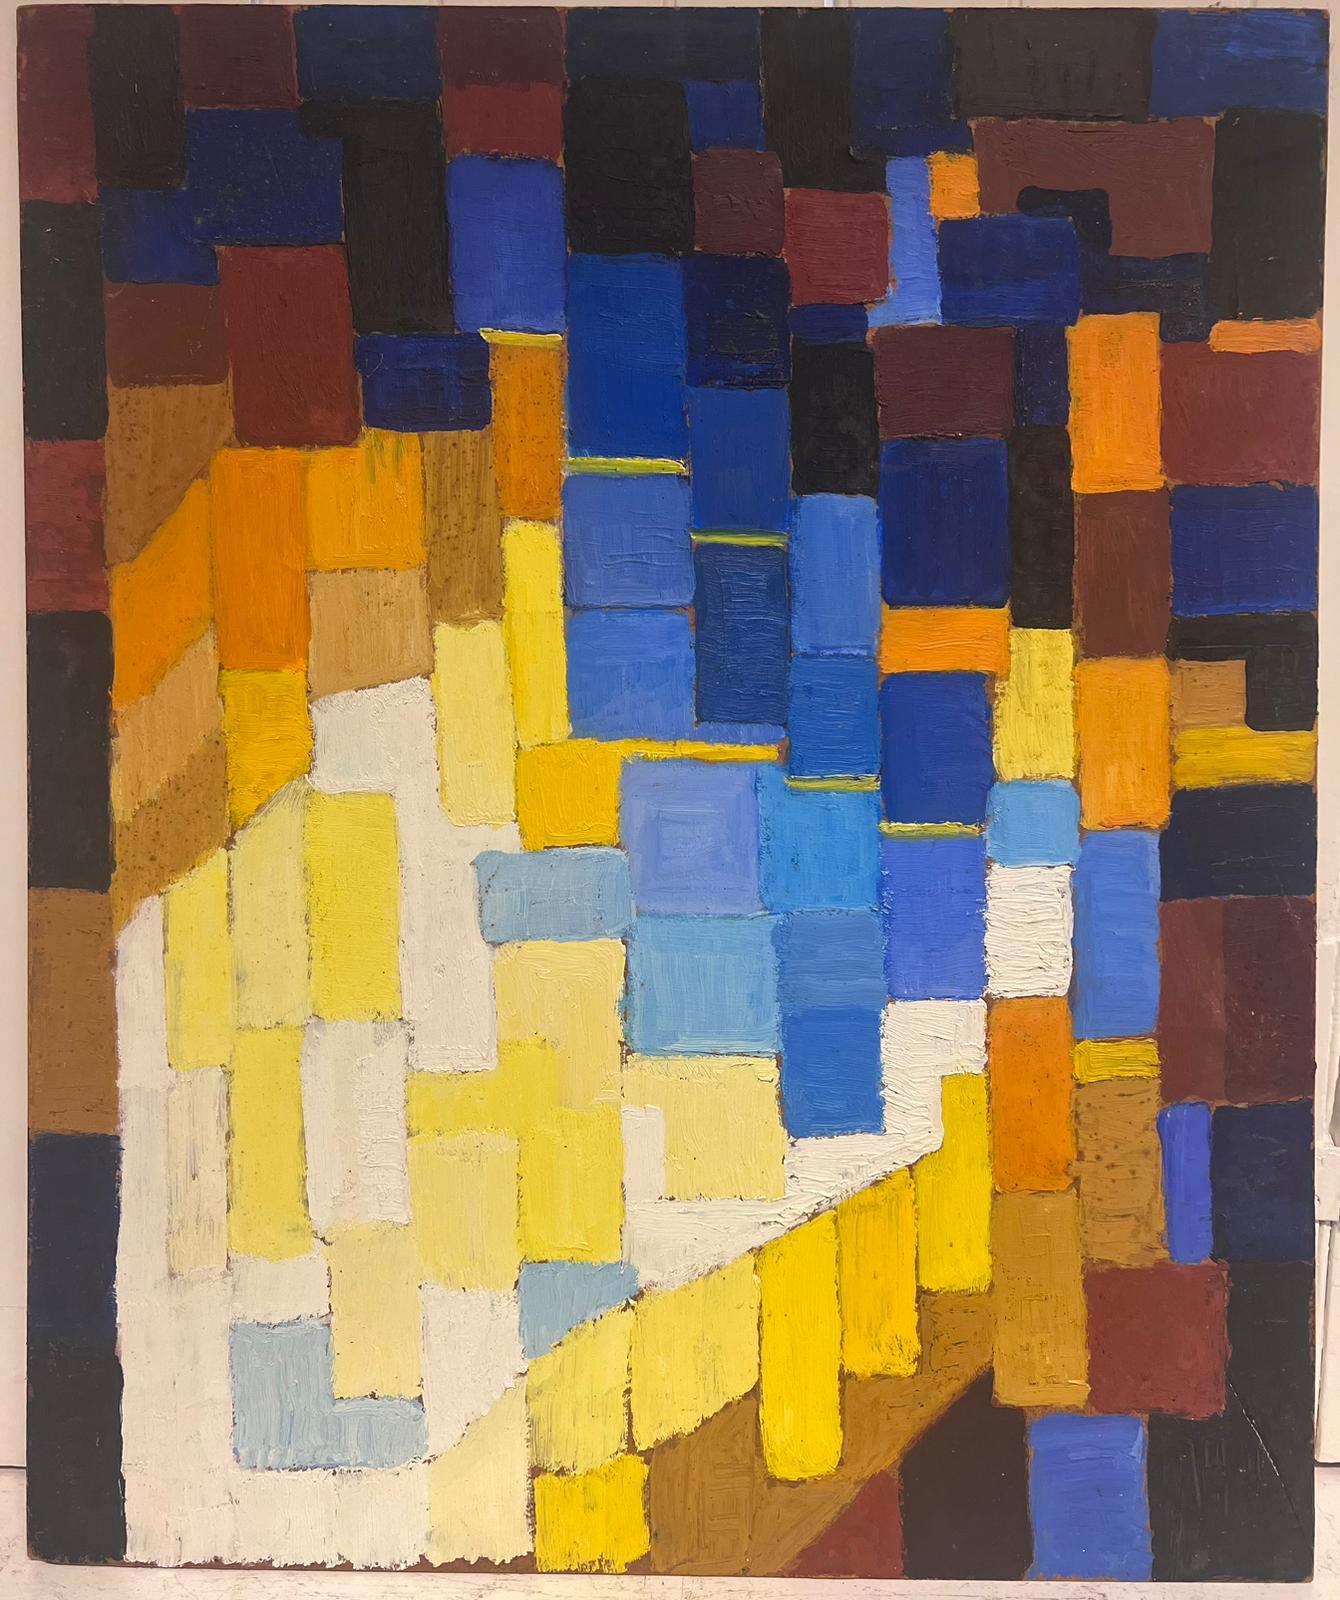 French School, circa 1970's
Cubist composition
oil on board, unframed
board: 29 x 24 inches
provenance: private collection, France
condition: very good and sound condition 